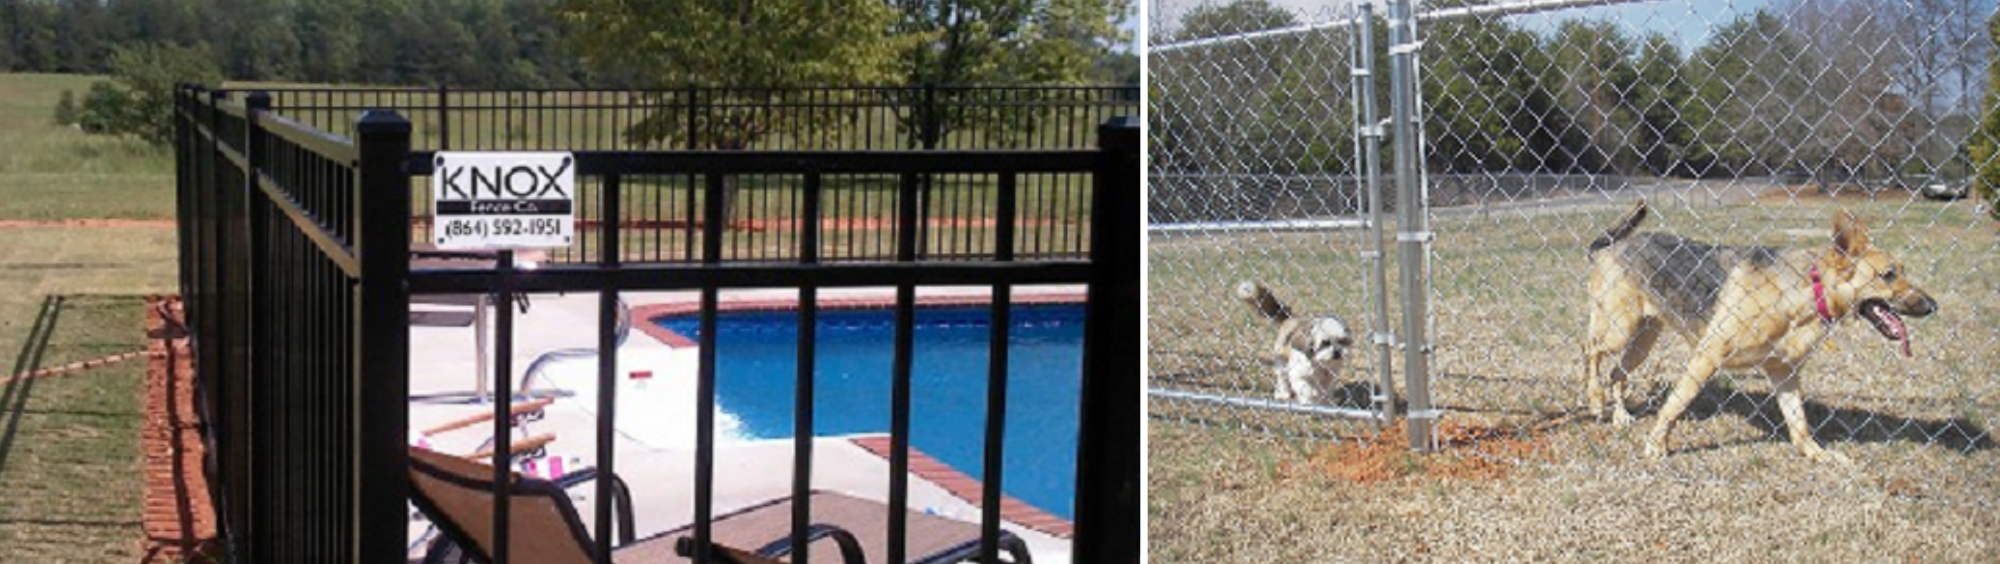 Aluminum Fence and Chain Link Fence